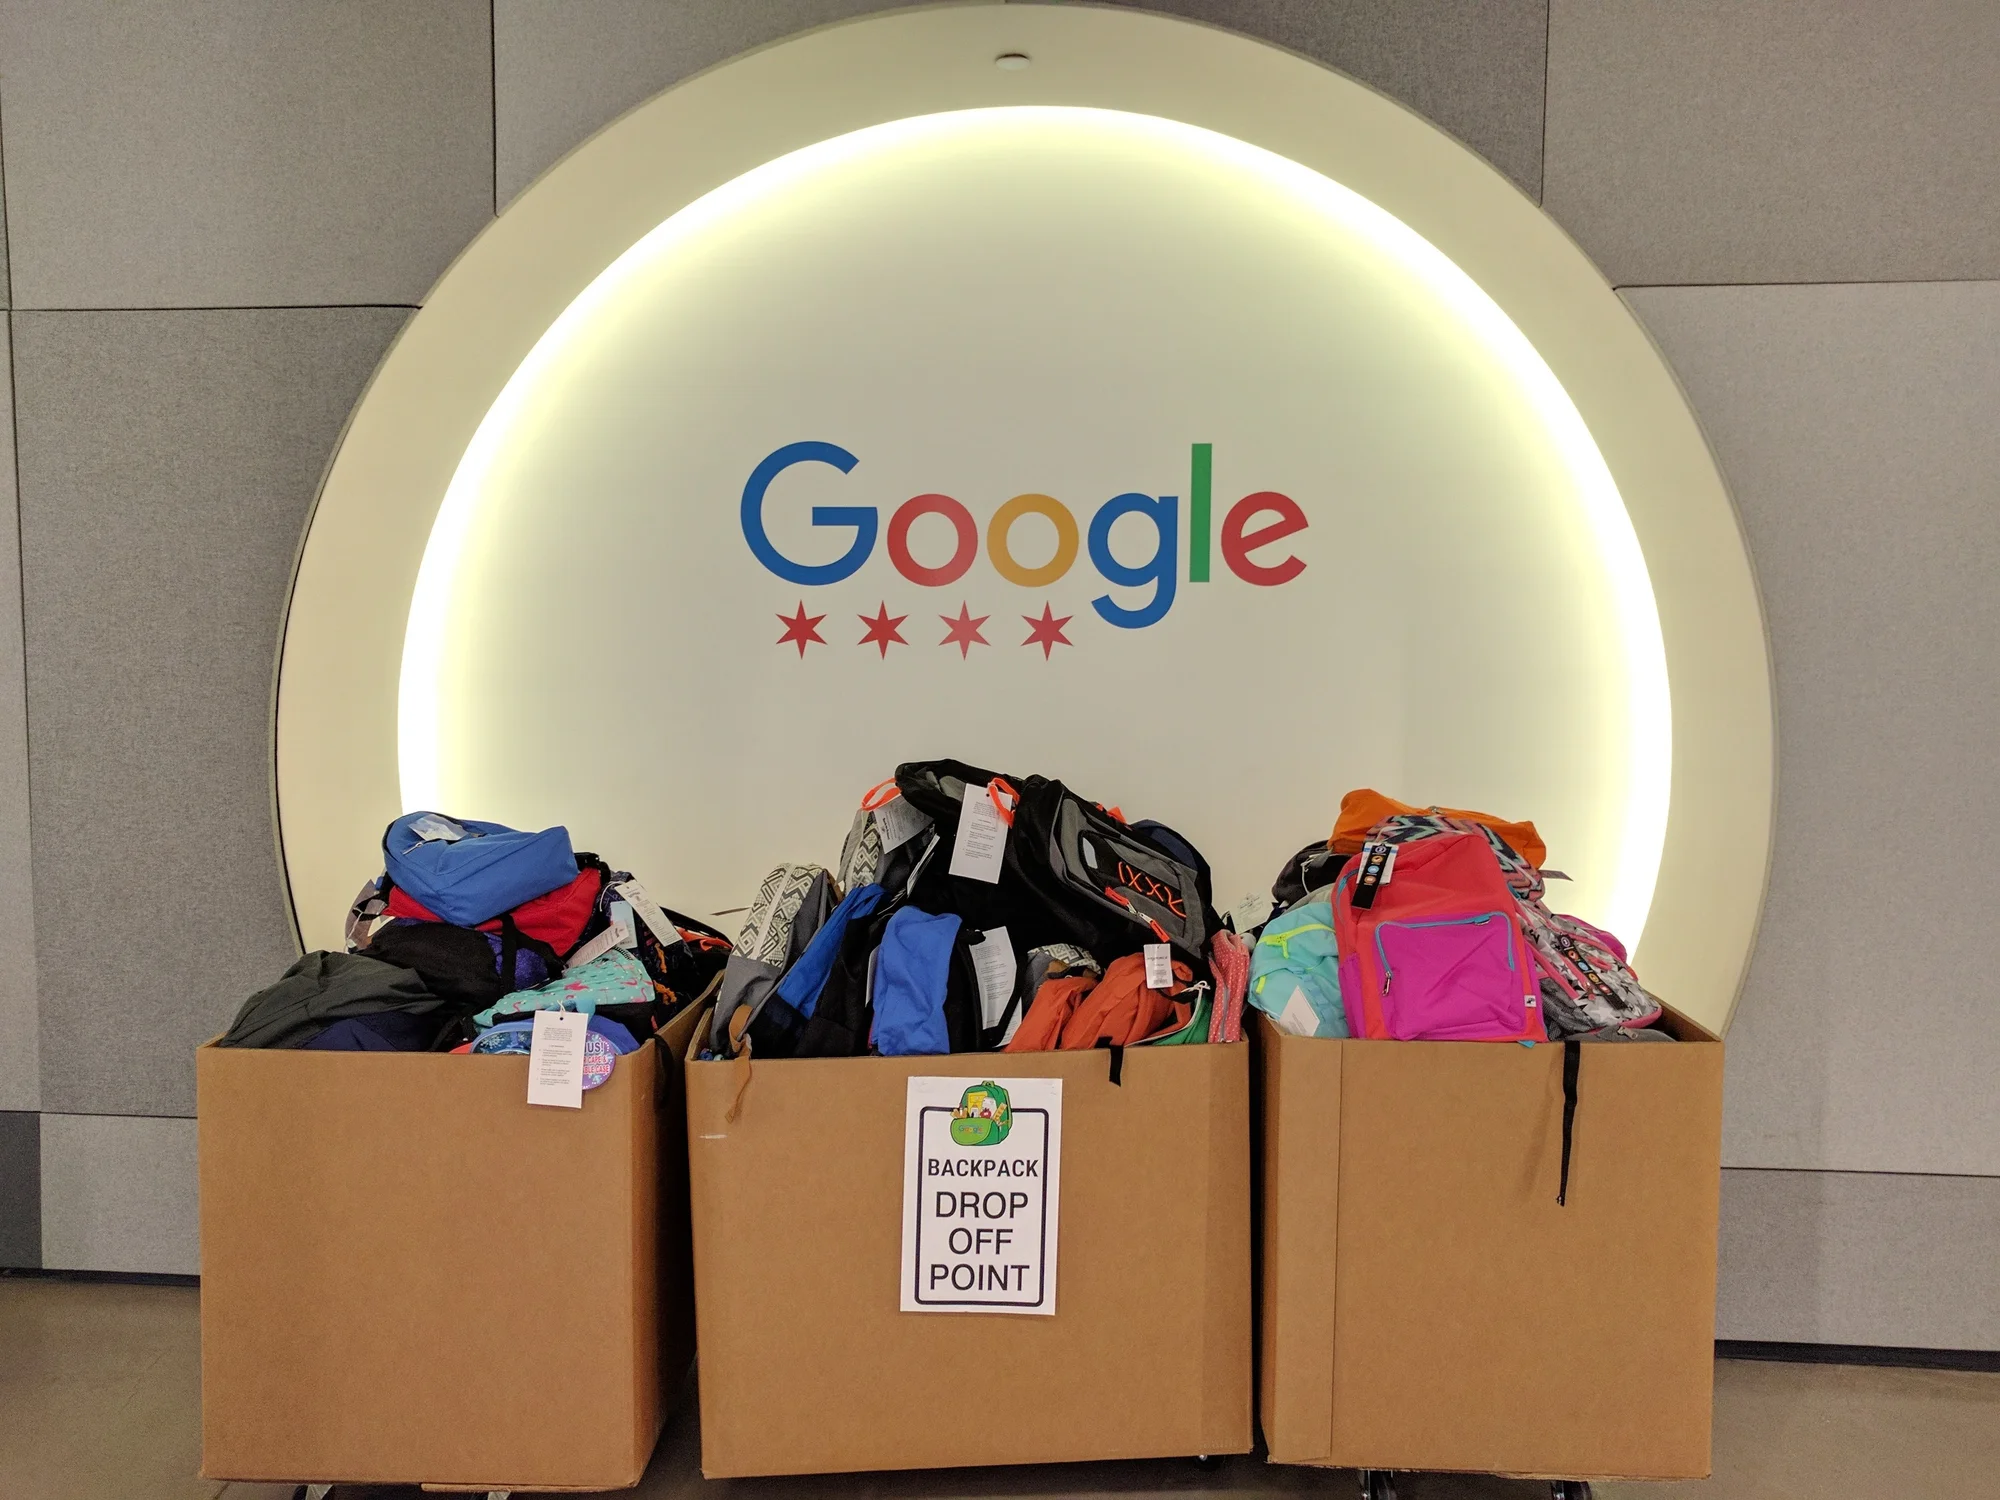 Three large cardboard boxes lined up next to each other, each filled with backpacks of different sizes and colors. On the white wall behind them is the Google logo with four red stars underneath symbolizing the Chicago flag.